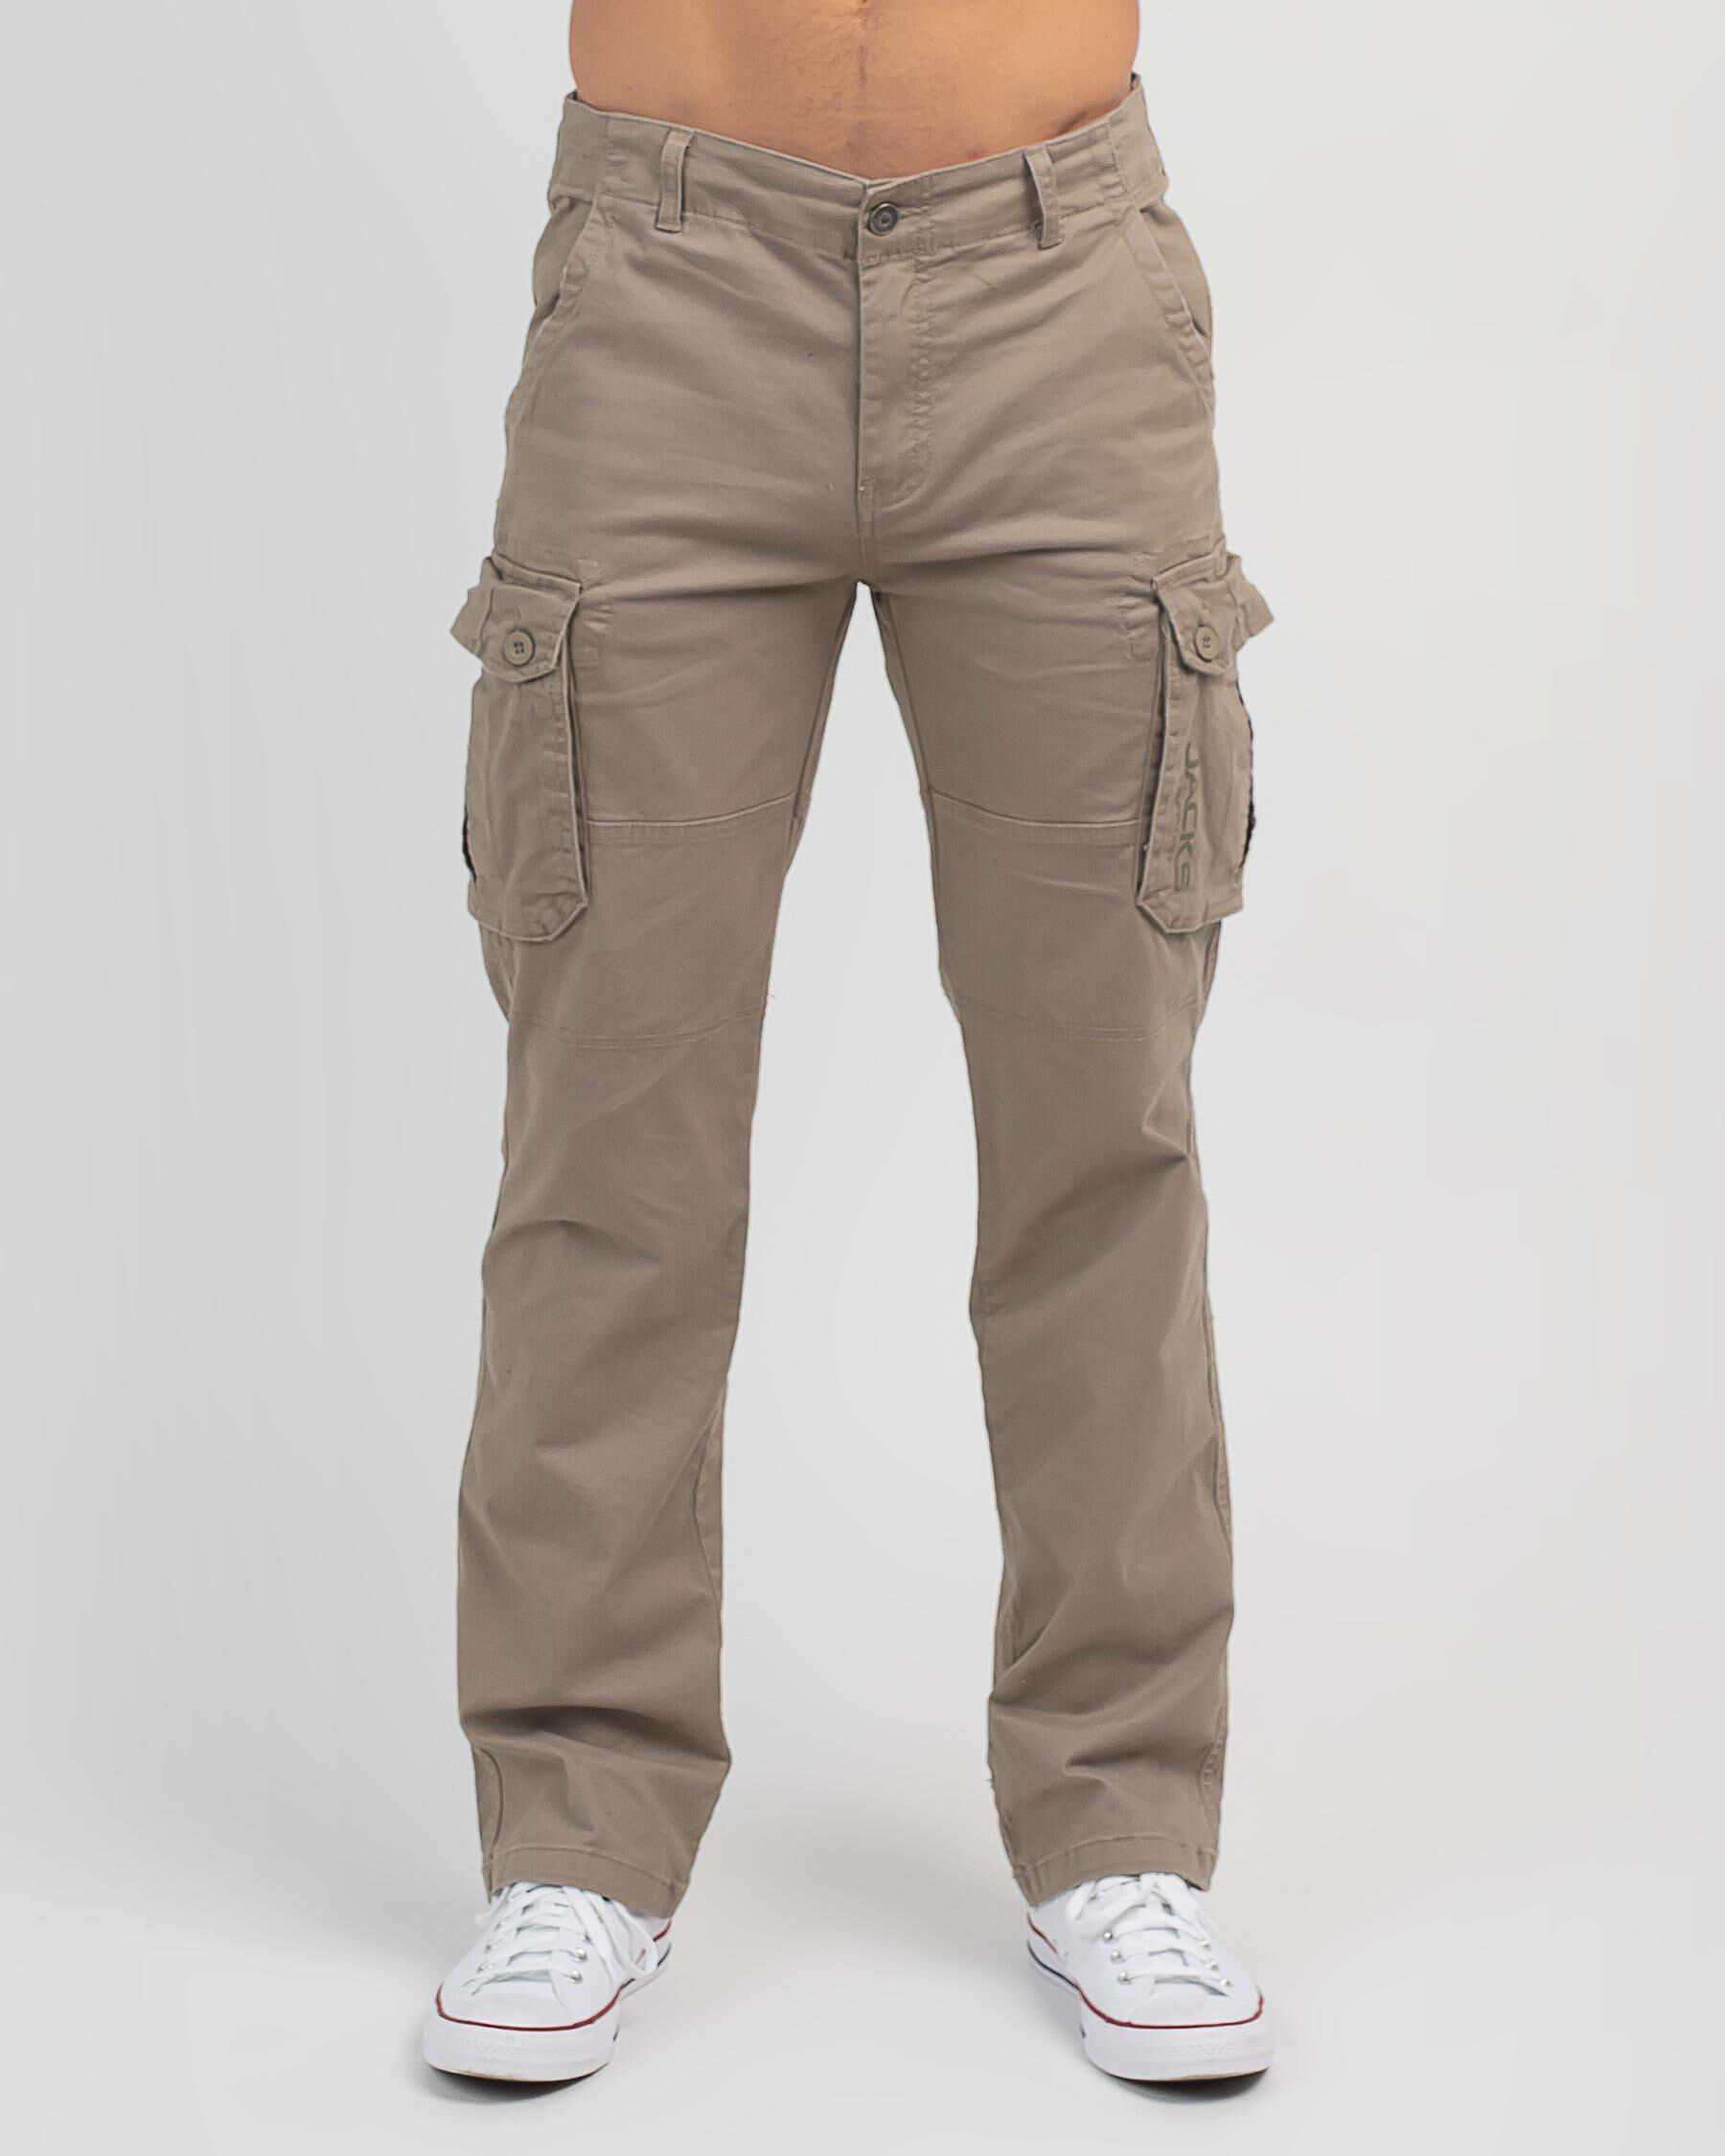 Cargo pants are going uptown